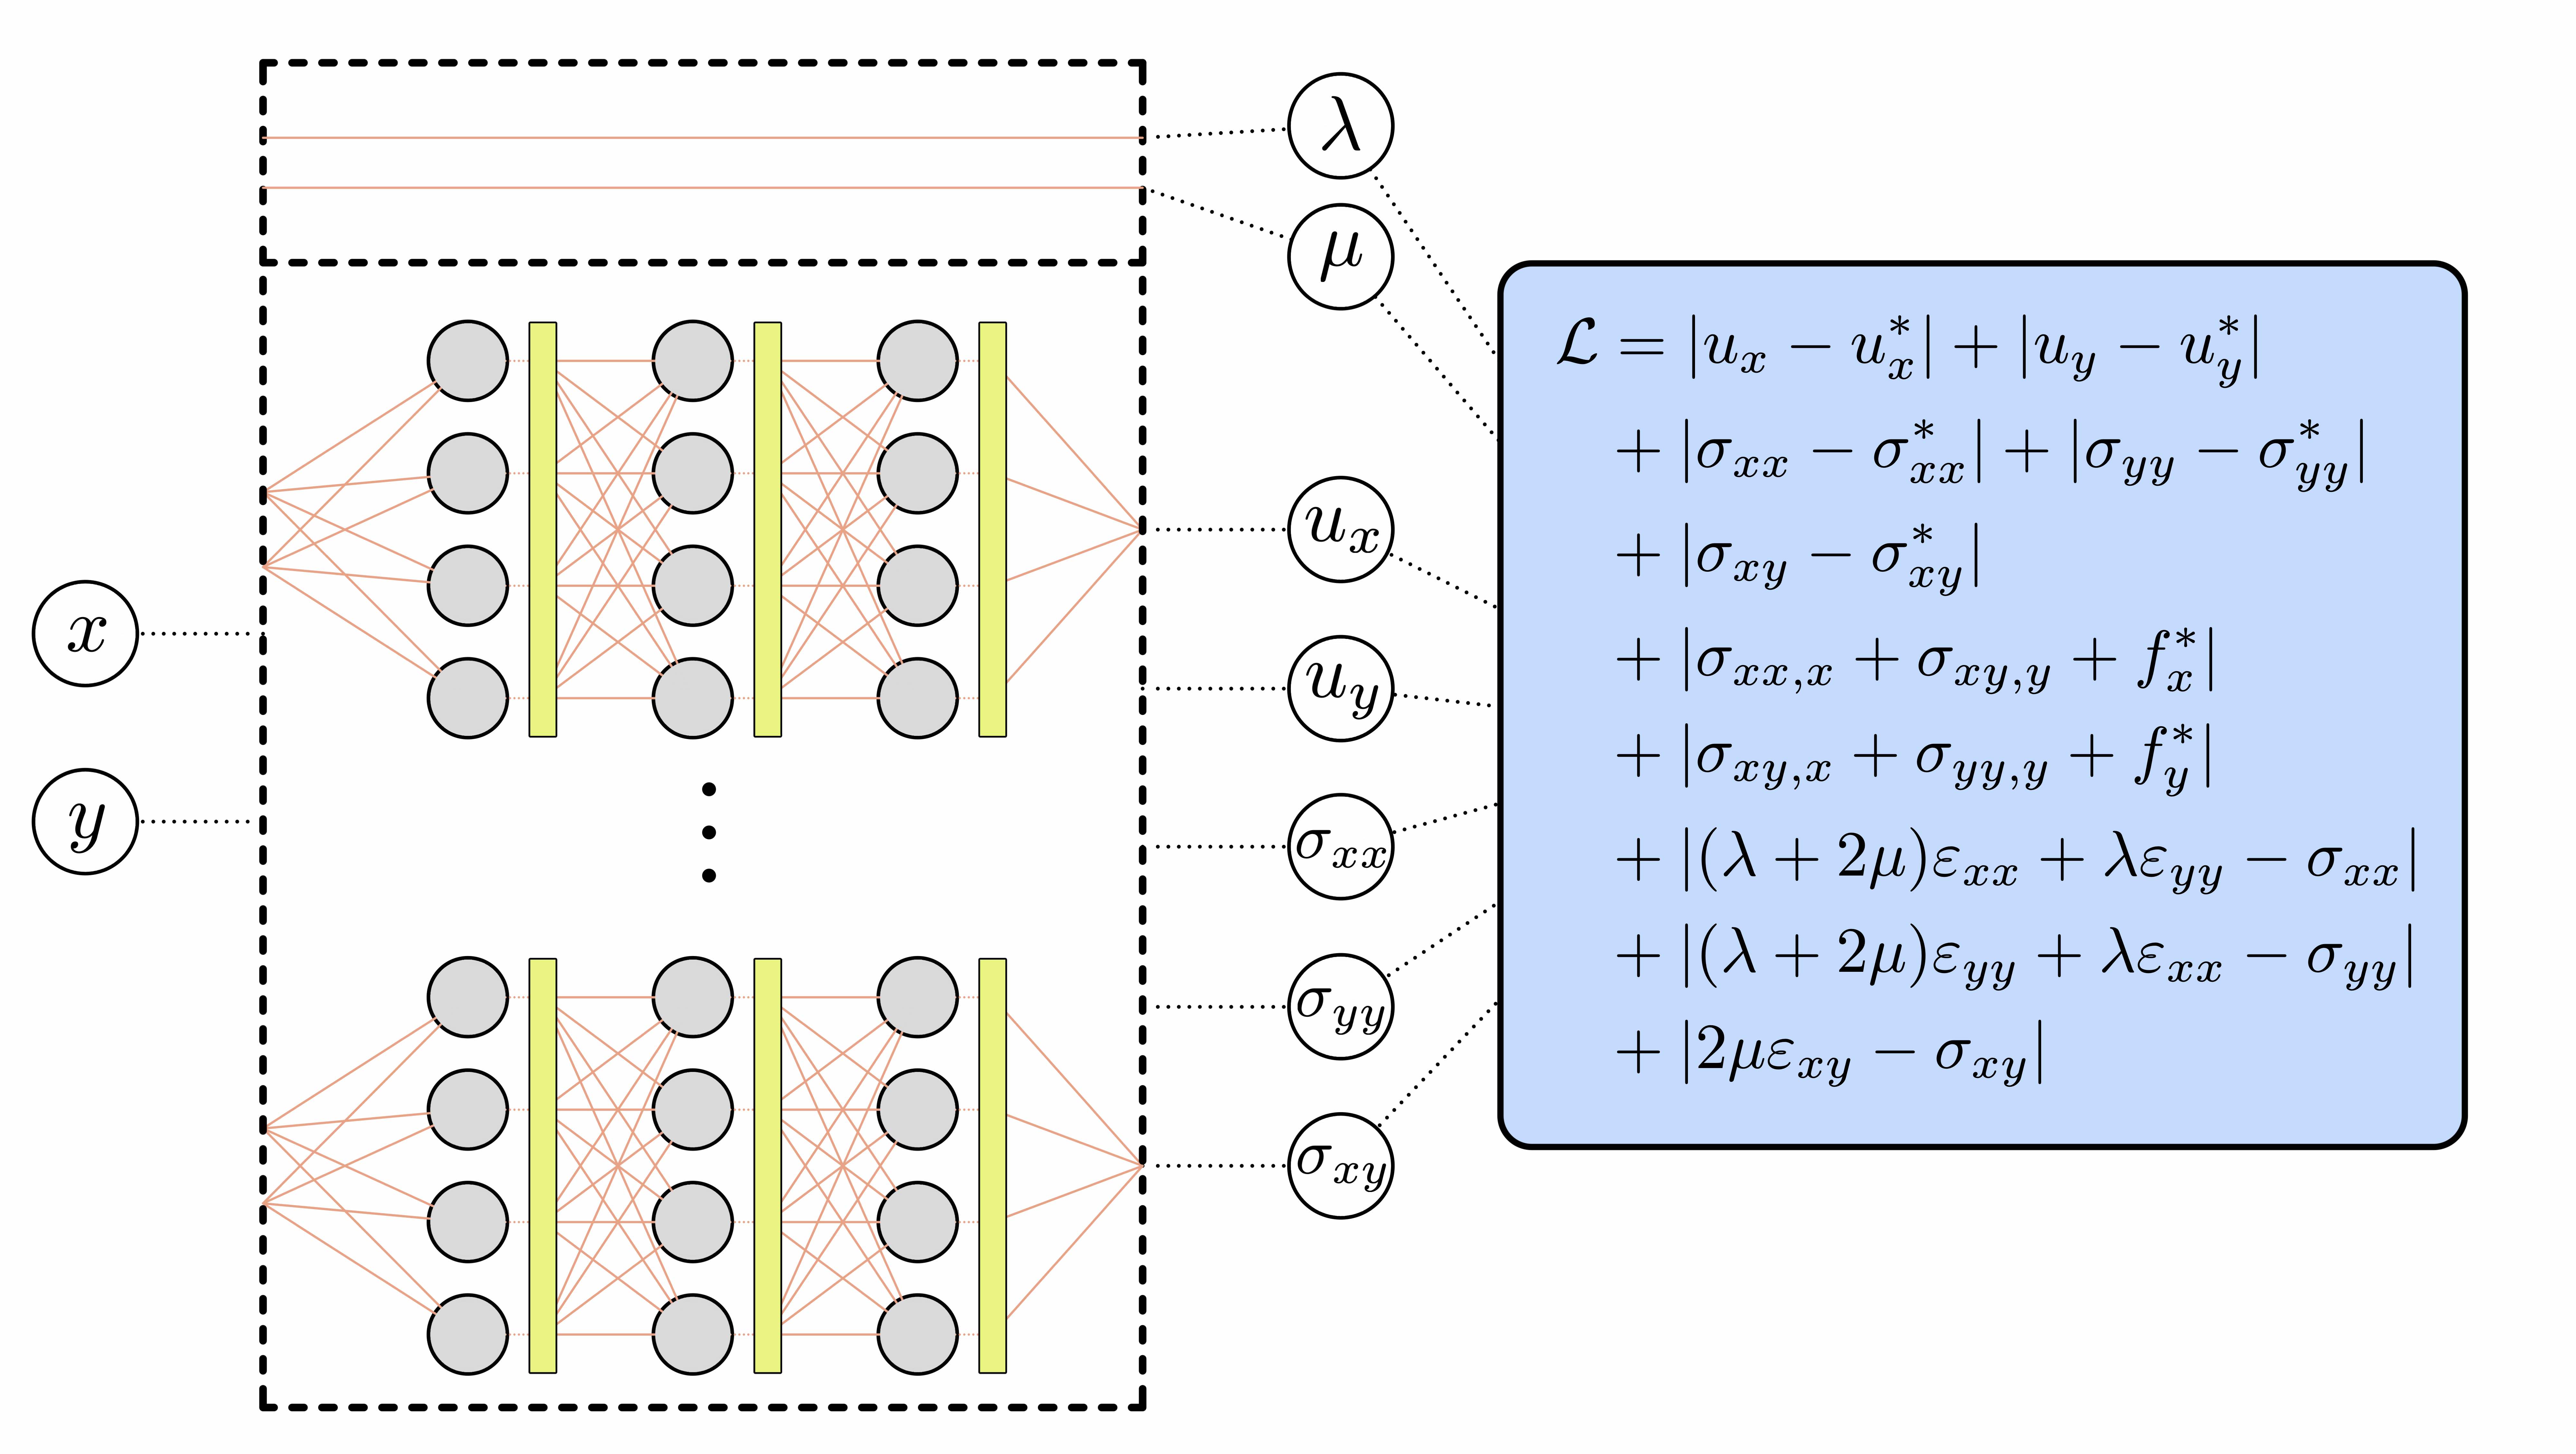 Physics-informed neural networks for solid mechanics